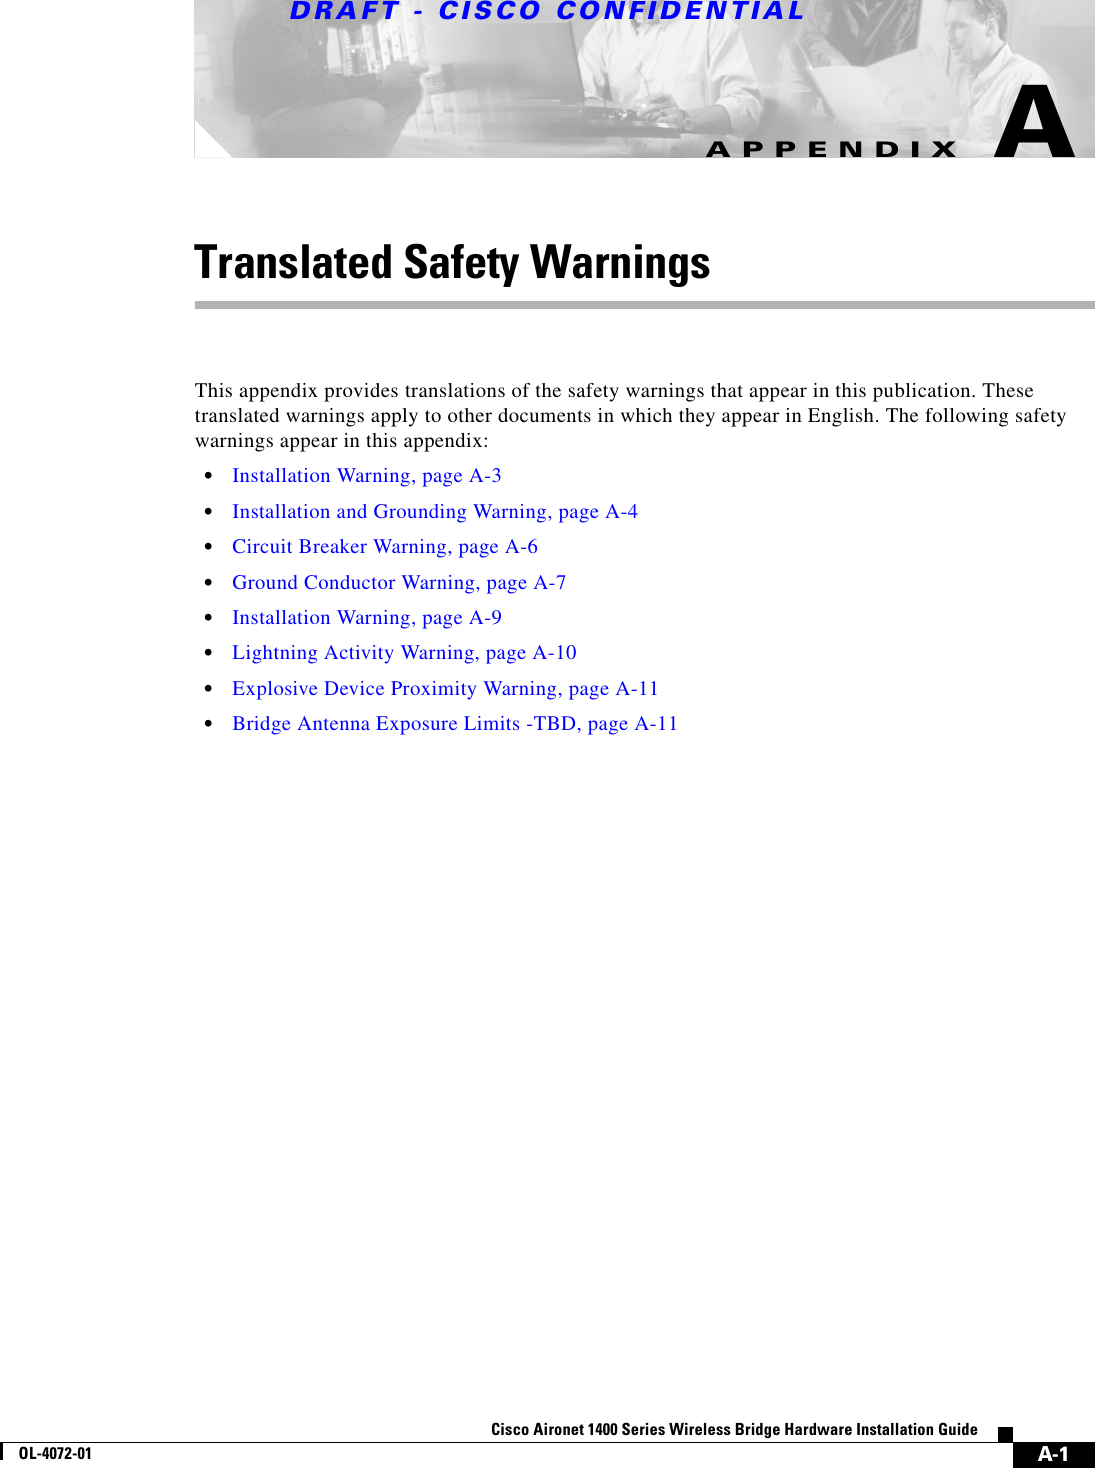 DRAFT - CISCO CONFIDENTIALA-1Cisco Aironet 1400 Series Wireless Bridge Hardware Installation GuideOL-4072-01APPENDIXATranslated Safety WarningsThis appendix provides translations of the safety warnings that appear in this publication. These translated warnings apply to other documents in which they appear in English. The following safety warnings appear in this appendix:•Installation Warning, page A-3•Installation and Grounding Warning, page A-4•Circuit Breaker Warning, page A-6•Ground Conductor Warning, page A-7•Installation Warning, page A-9•Lightning Activity Warning, page A-10•Explosive Device Proximity Warning, page A-11•Bridge Antenna Exposure Limits -TBD, page A-11